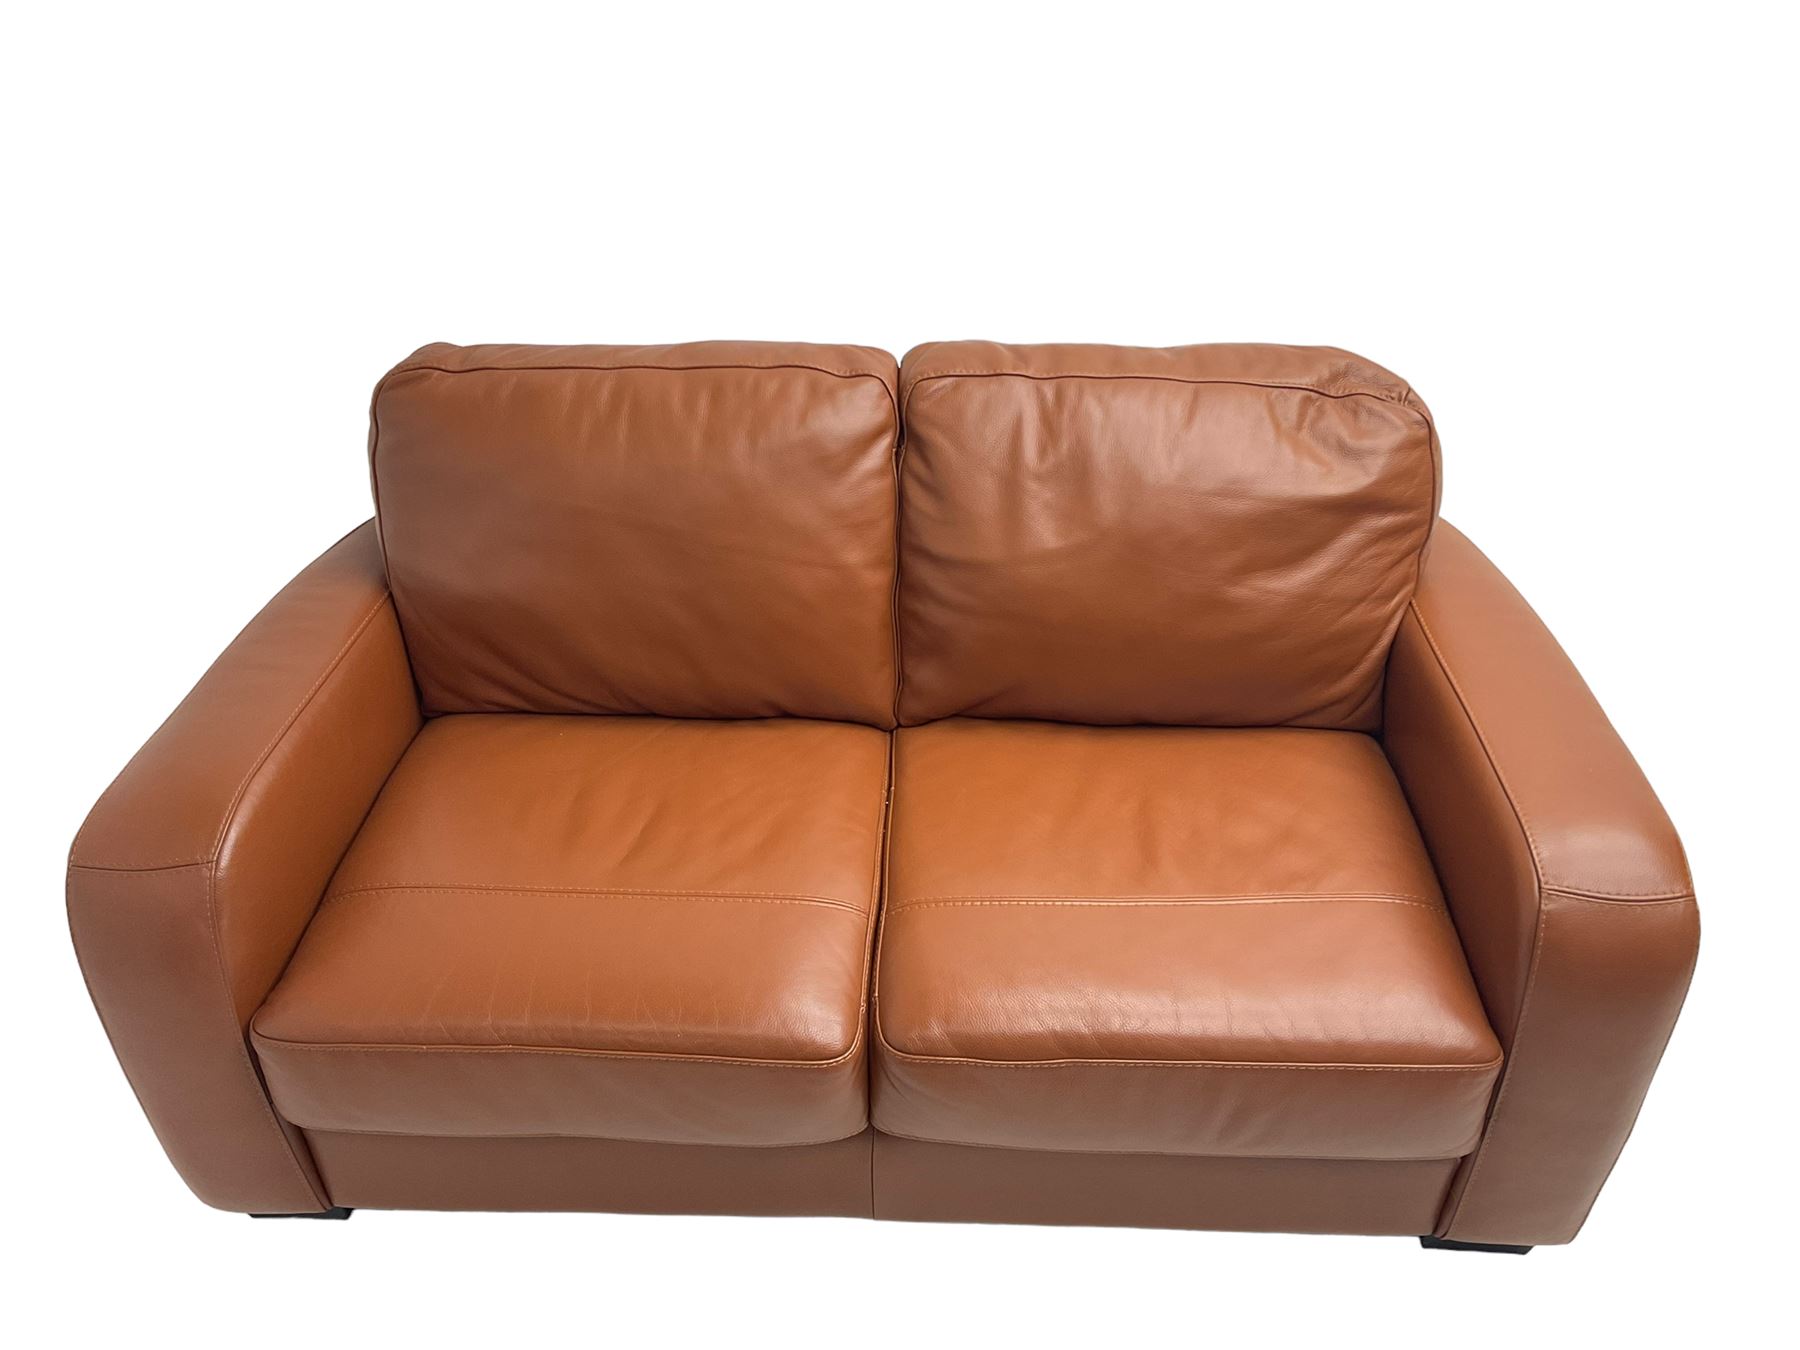 Two seat sofa - Image 4 of 6